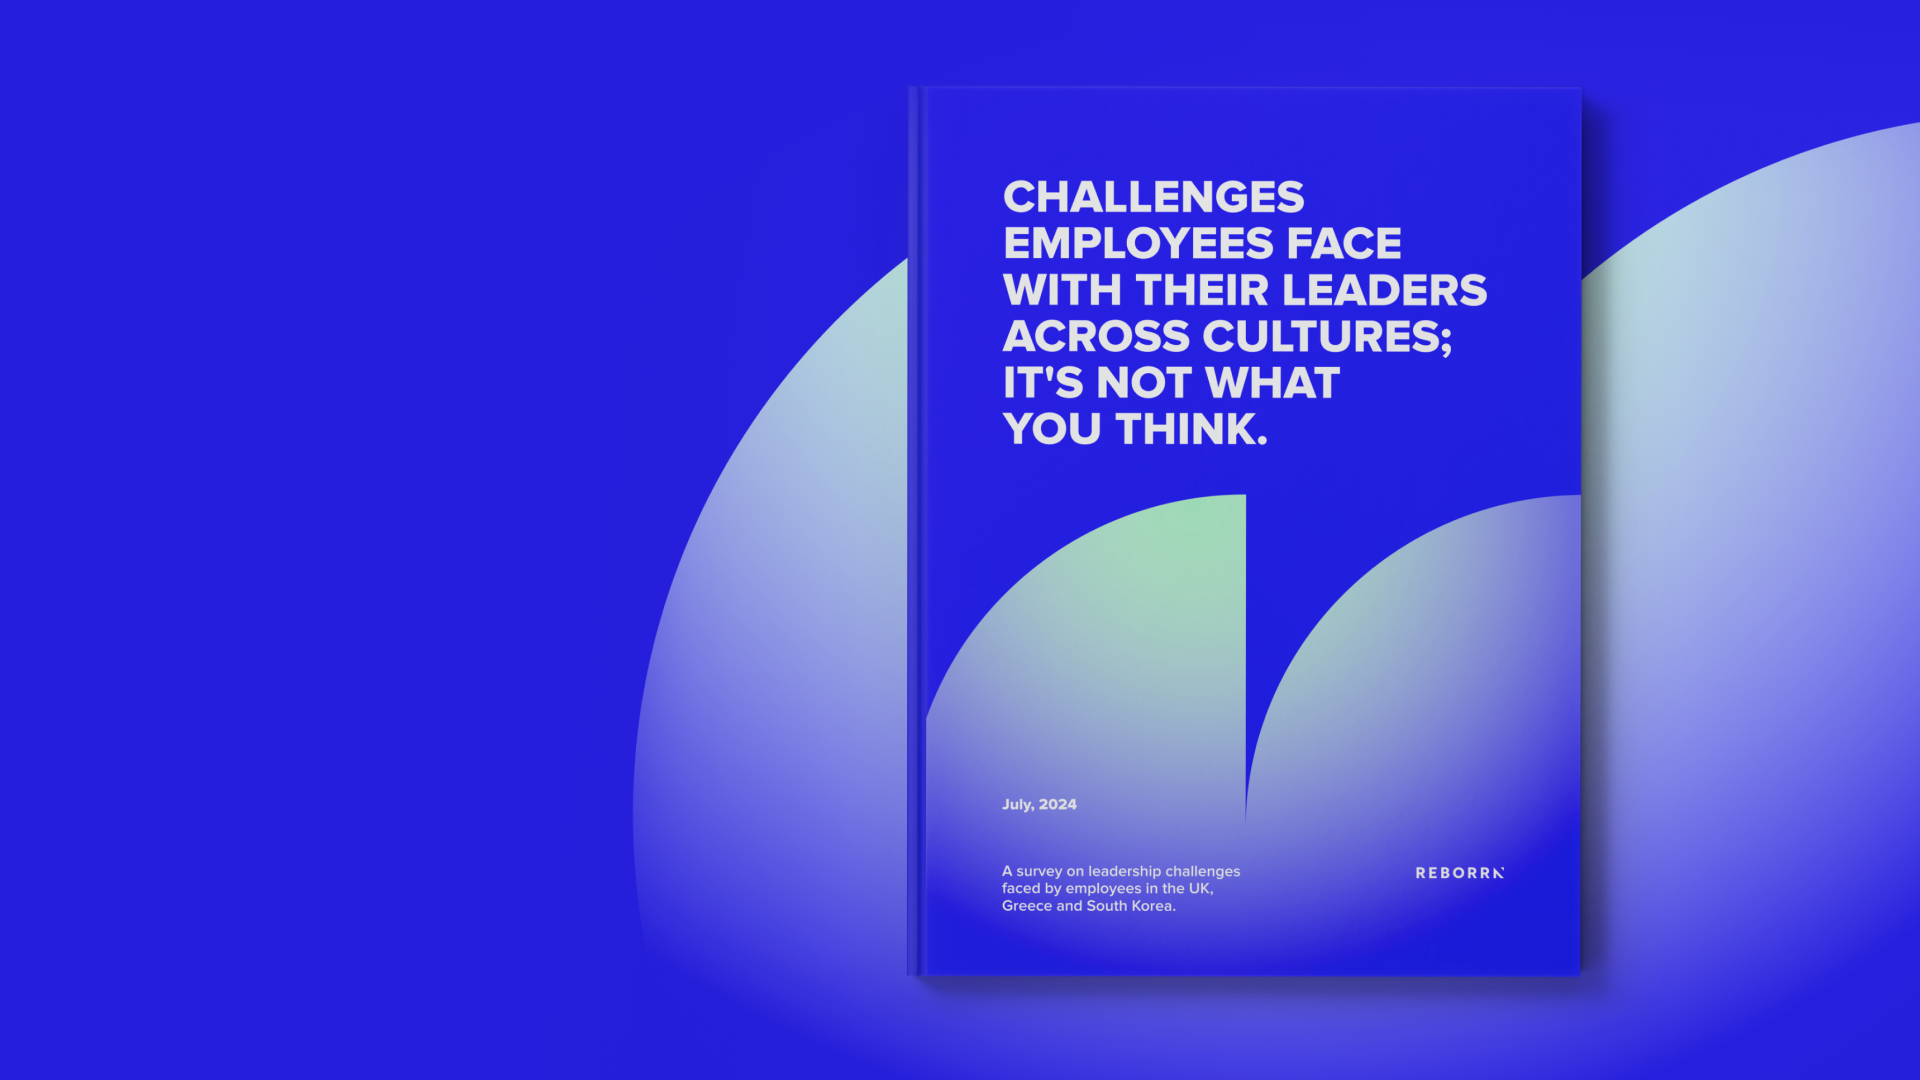 A blue cover of a report titled "Challenges Employees Face with Their Leaders Across Cultures; It's Not What You Think." The report is dated July 2024 and includes a survey on leadership challenges faced by employees in the UK, Greece, and South Korea. The bottom right corner features the logo and name of the organization, "REBORRN."